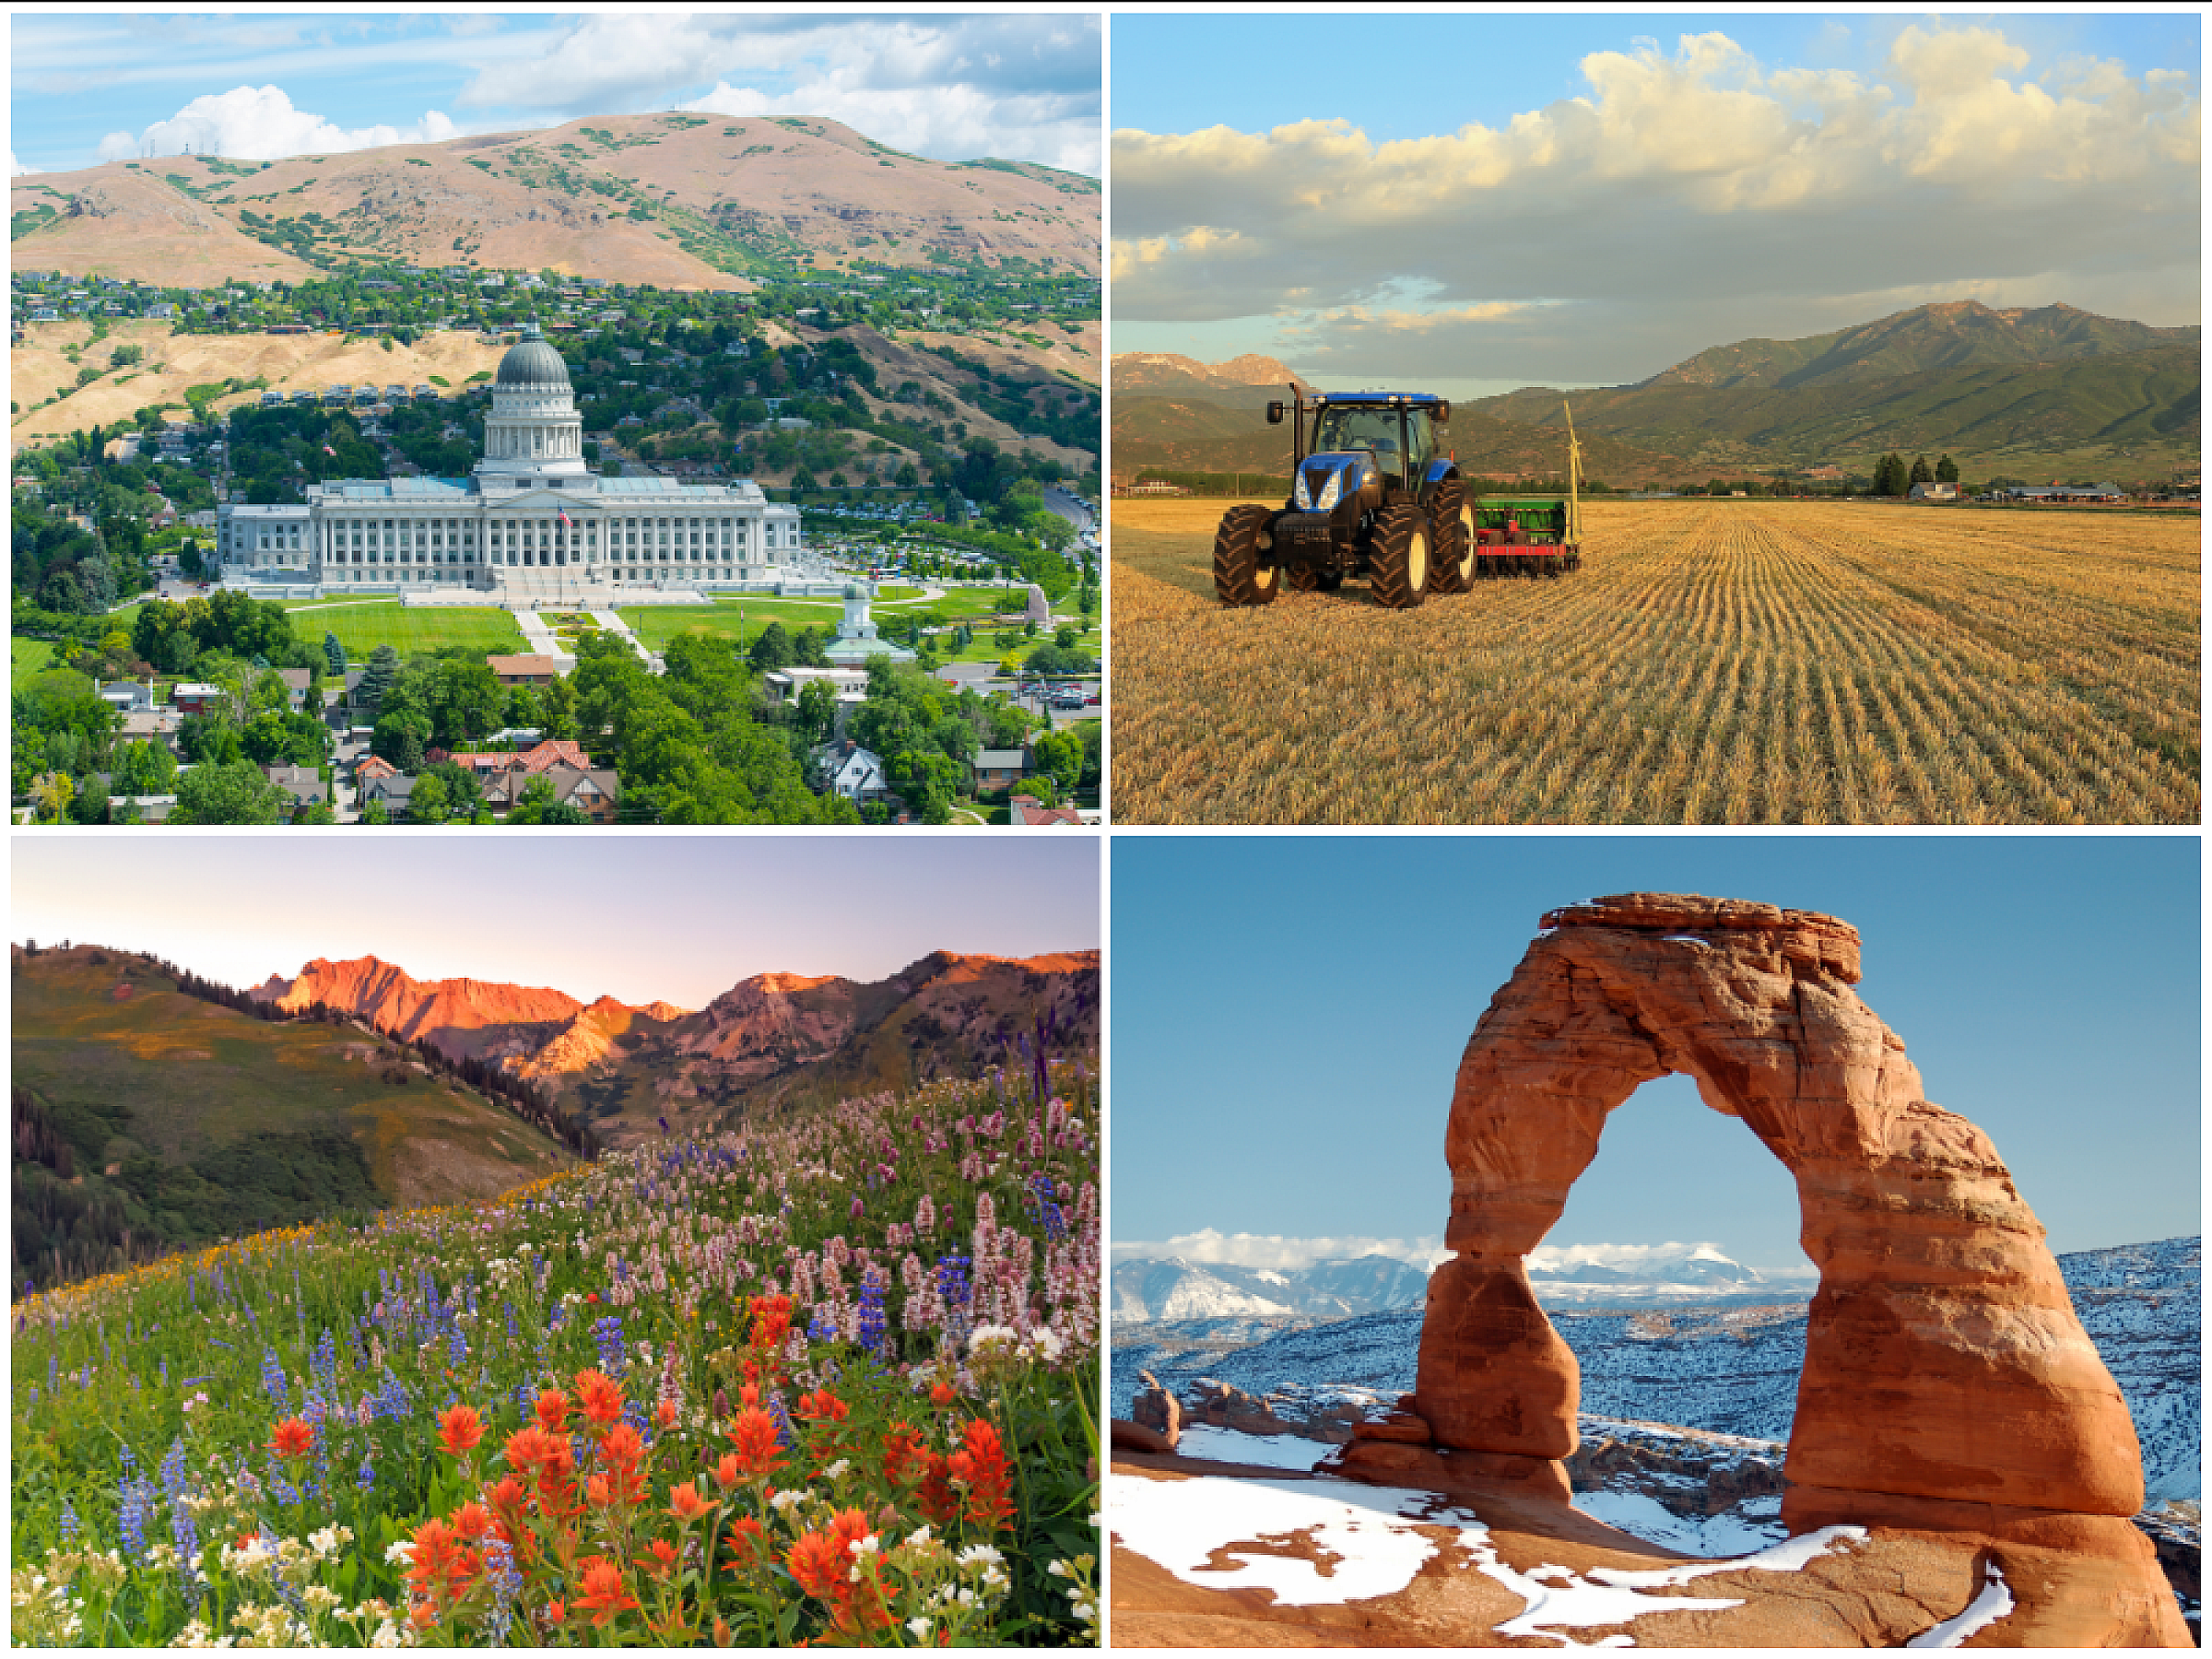 Clockwise from top left: Utah state capital, tractor in field, hills covered in wild flowers, stone arch formation